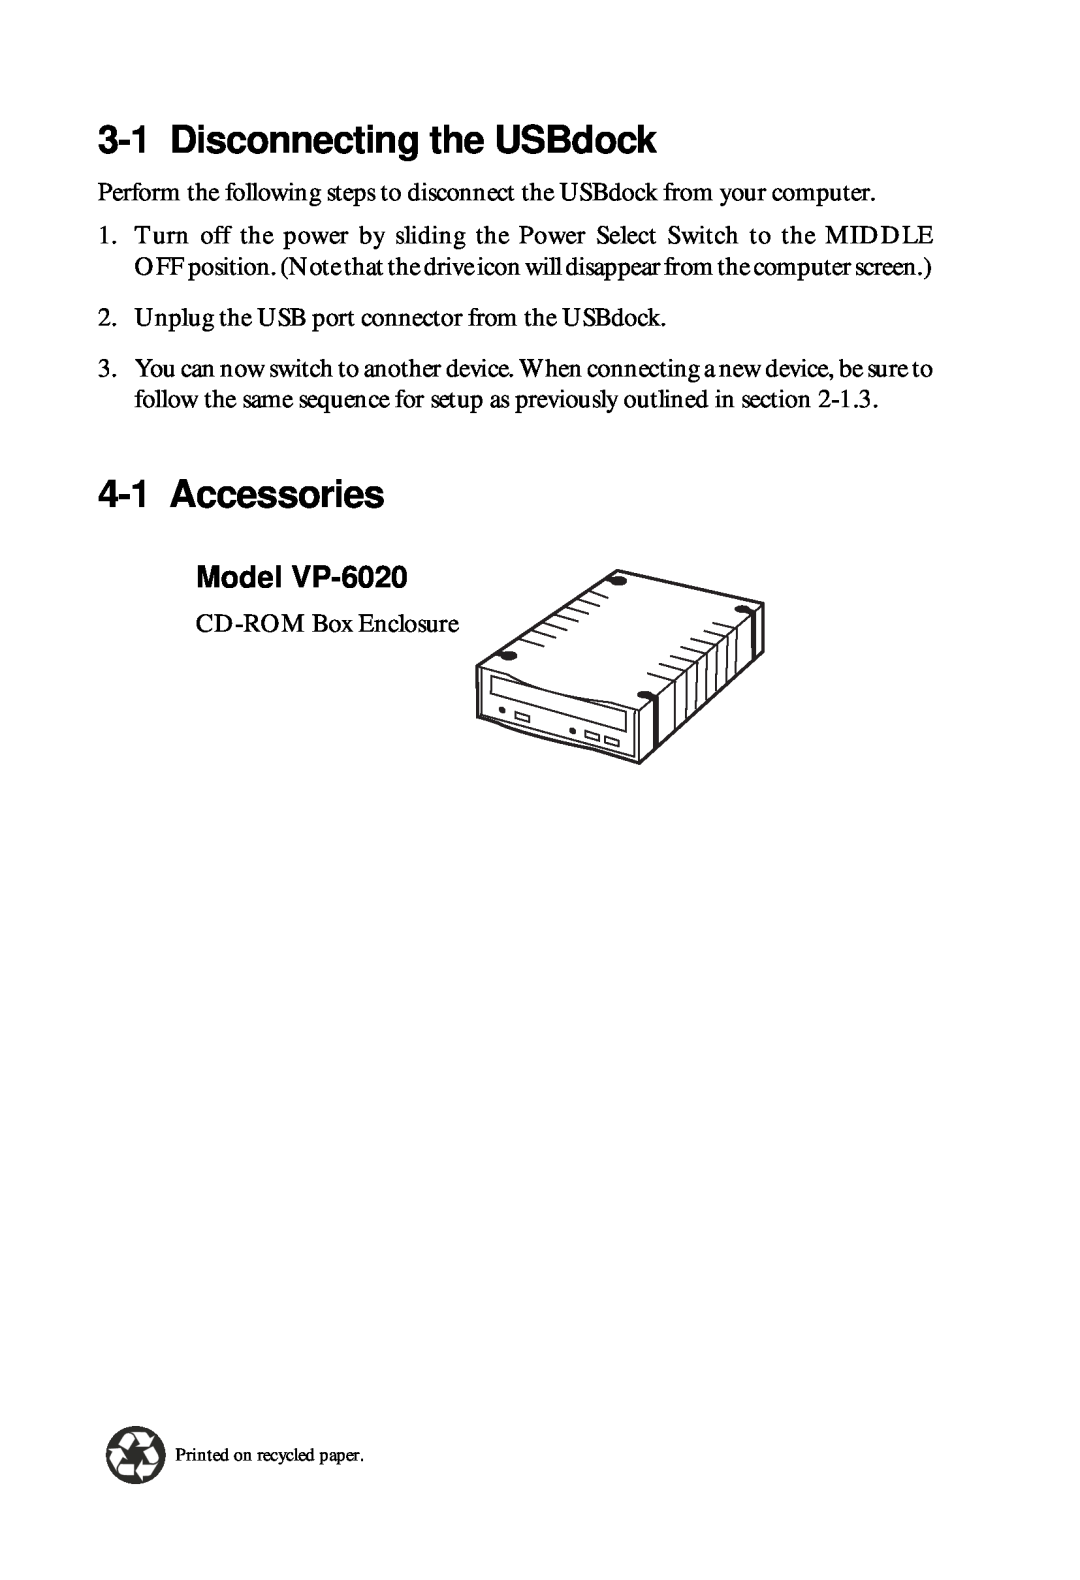 VIPowER VP-8058L installation manual Disconnecting the USBdock, Accessories, Model VP-6020 